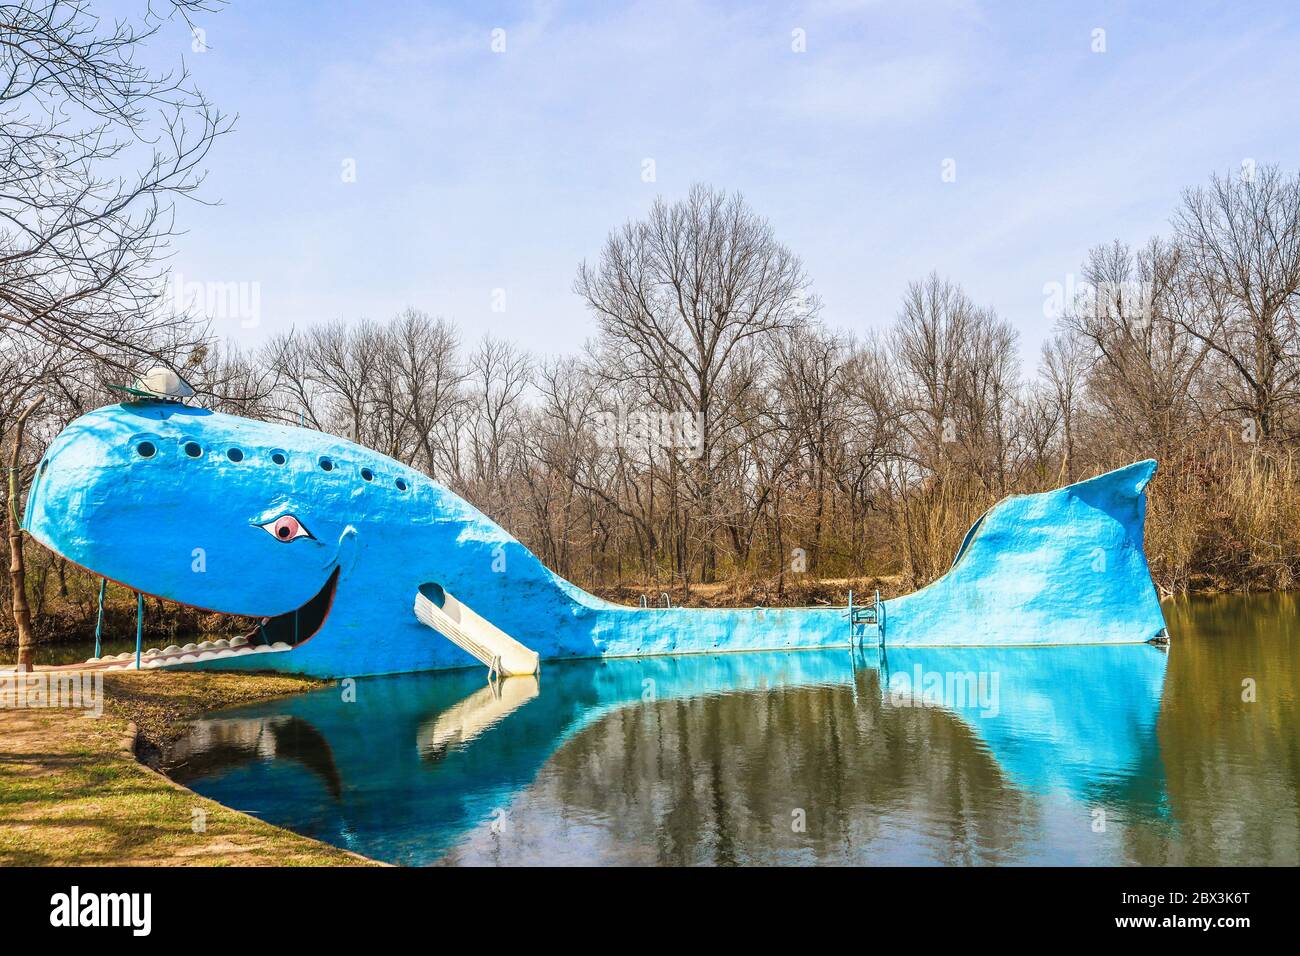 11-14-2018 Catoosa USA - Iconic Blue Whale vintage public tourist attraction along old Highway - Route 66 near Catoosa Oklahoma.jpg Stock Photo